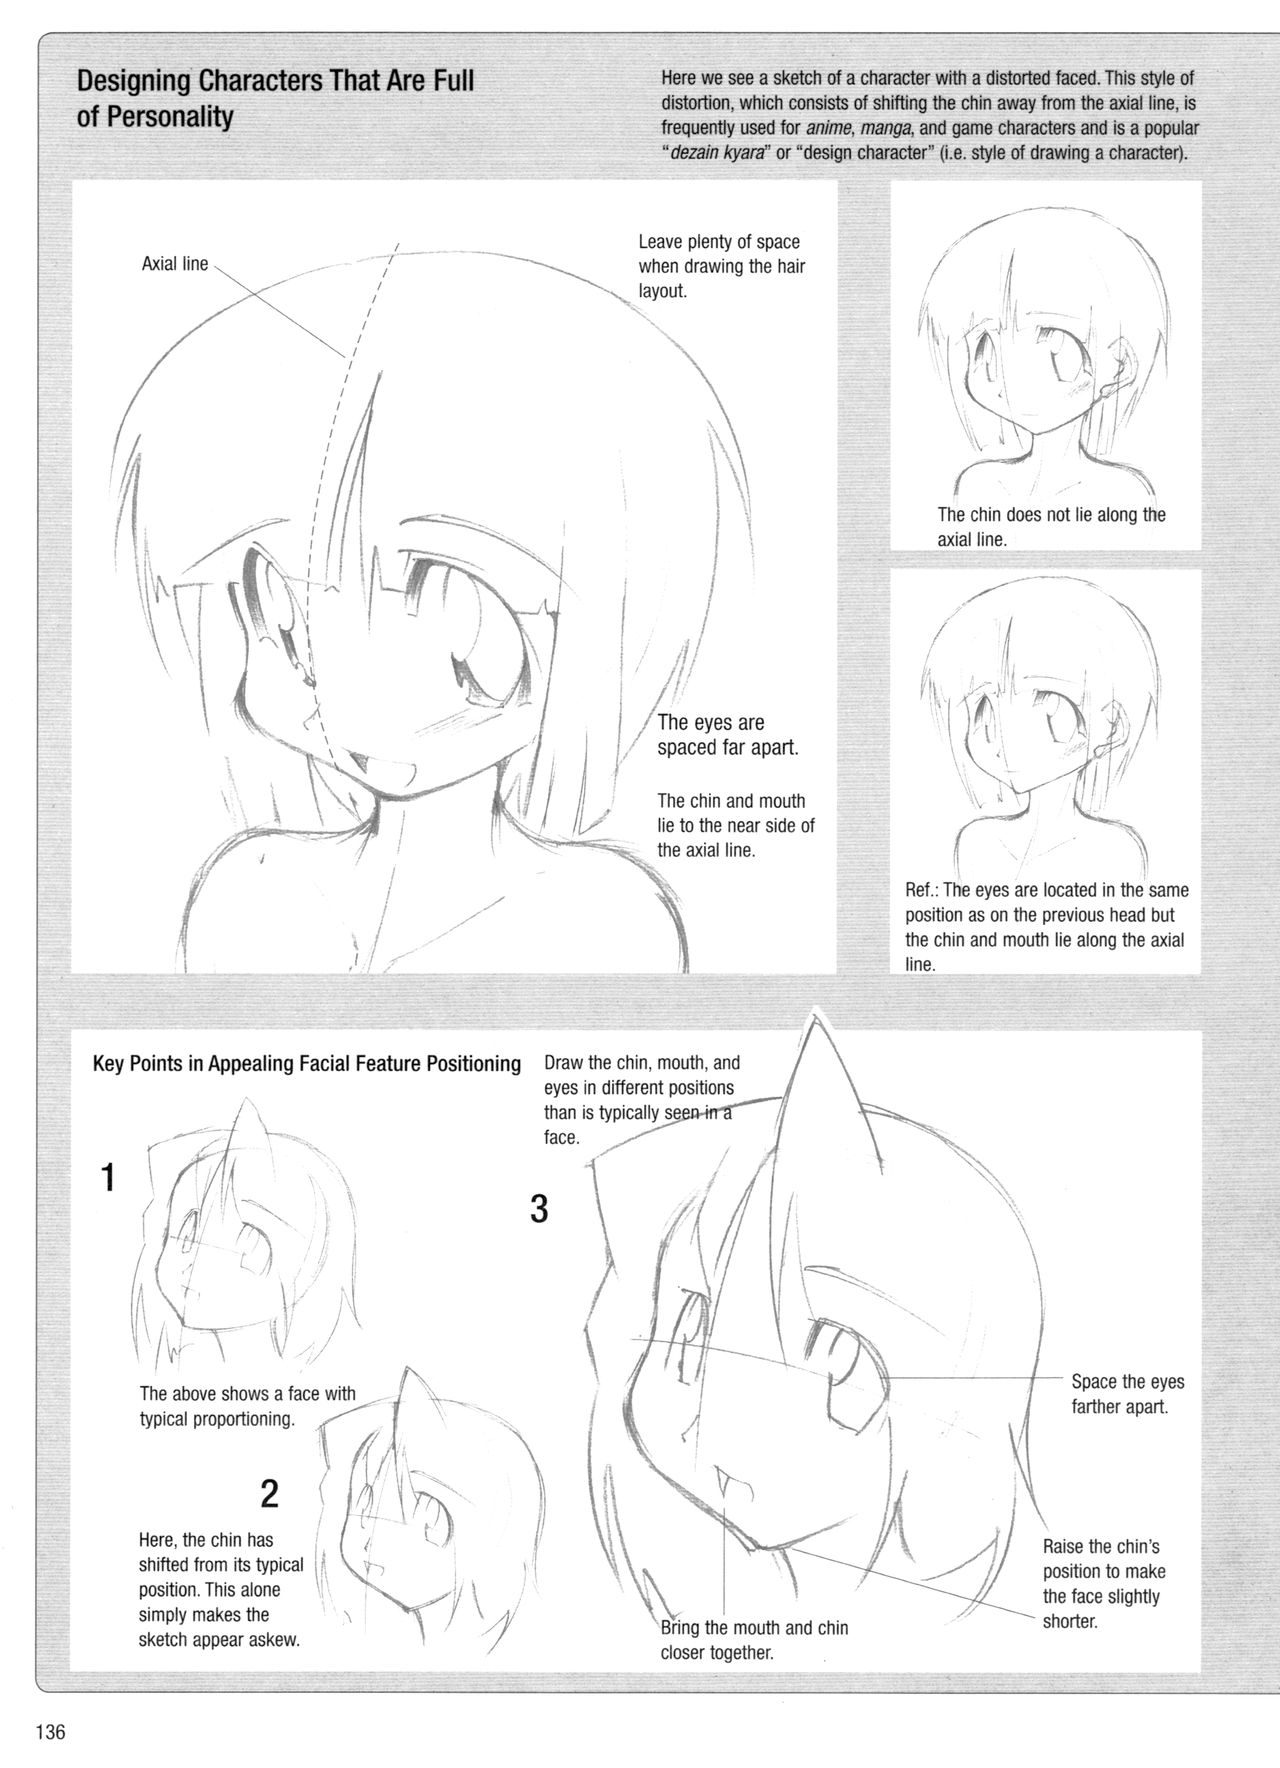 Sketching Manga-Style Vol. 3 - Unforgettable Characters 135